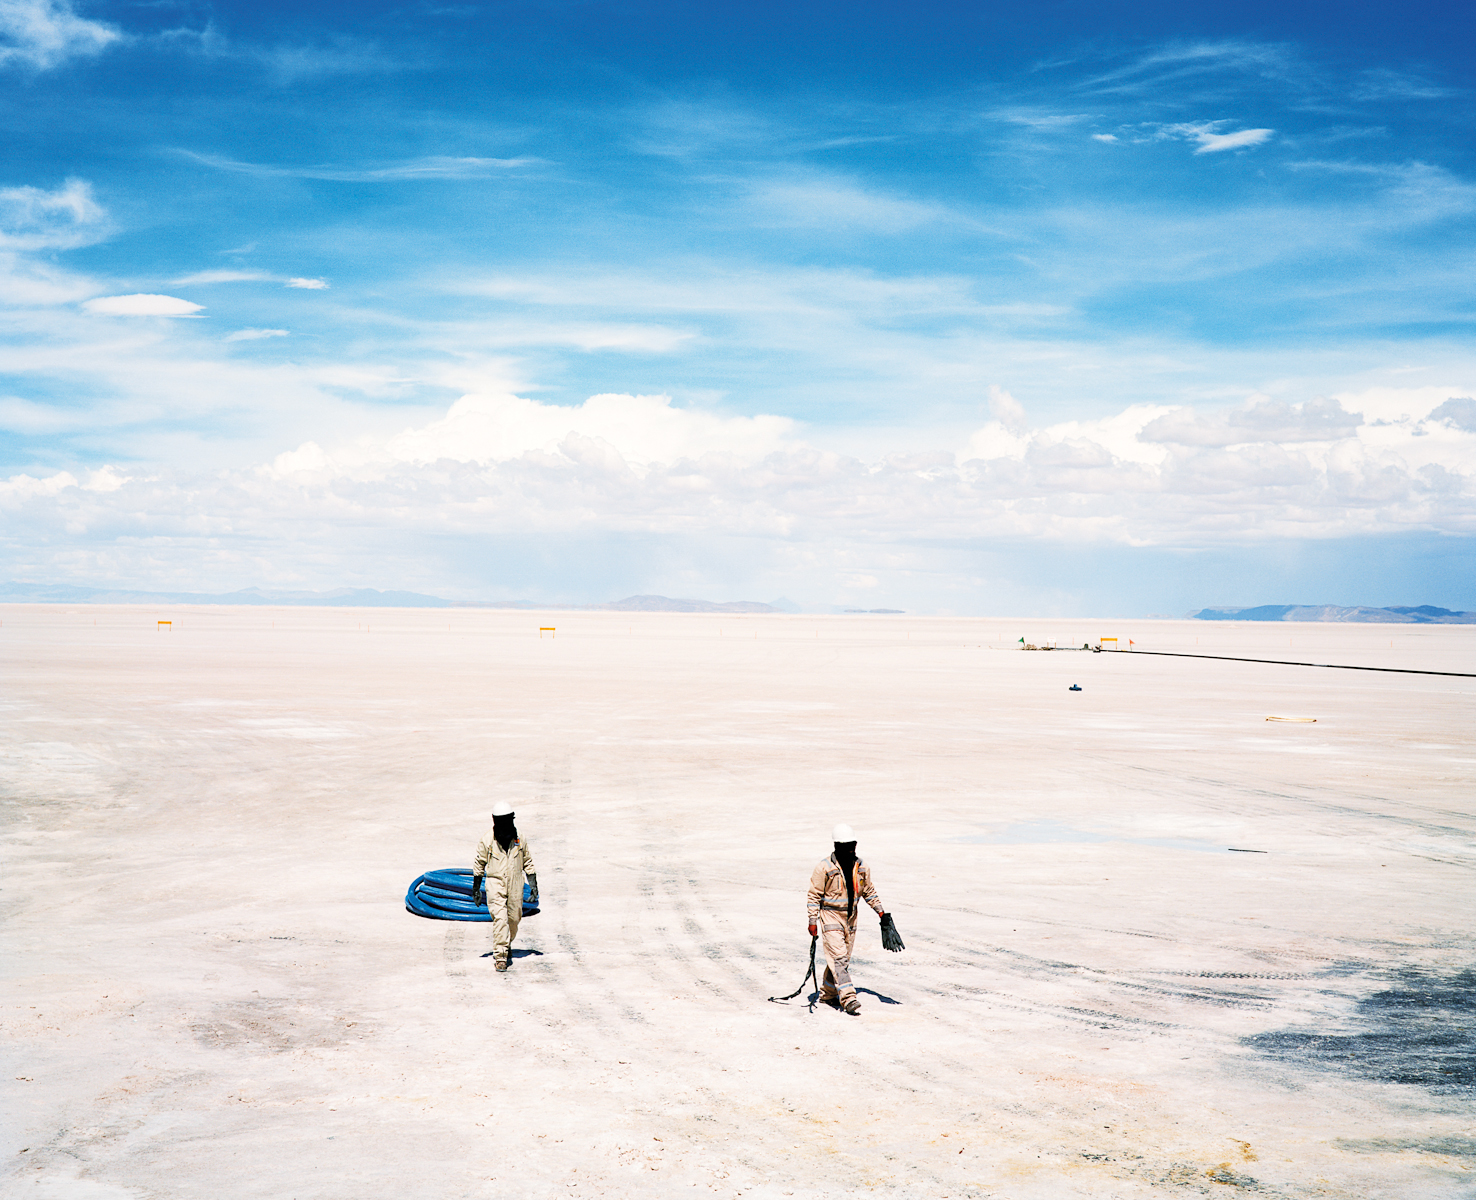   Workers at lithium constructions site in the Salar de Uyuni, Bolivia  